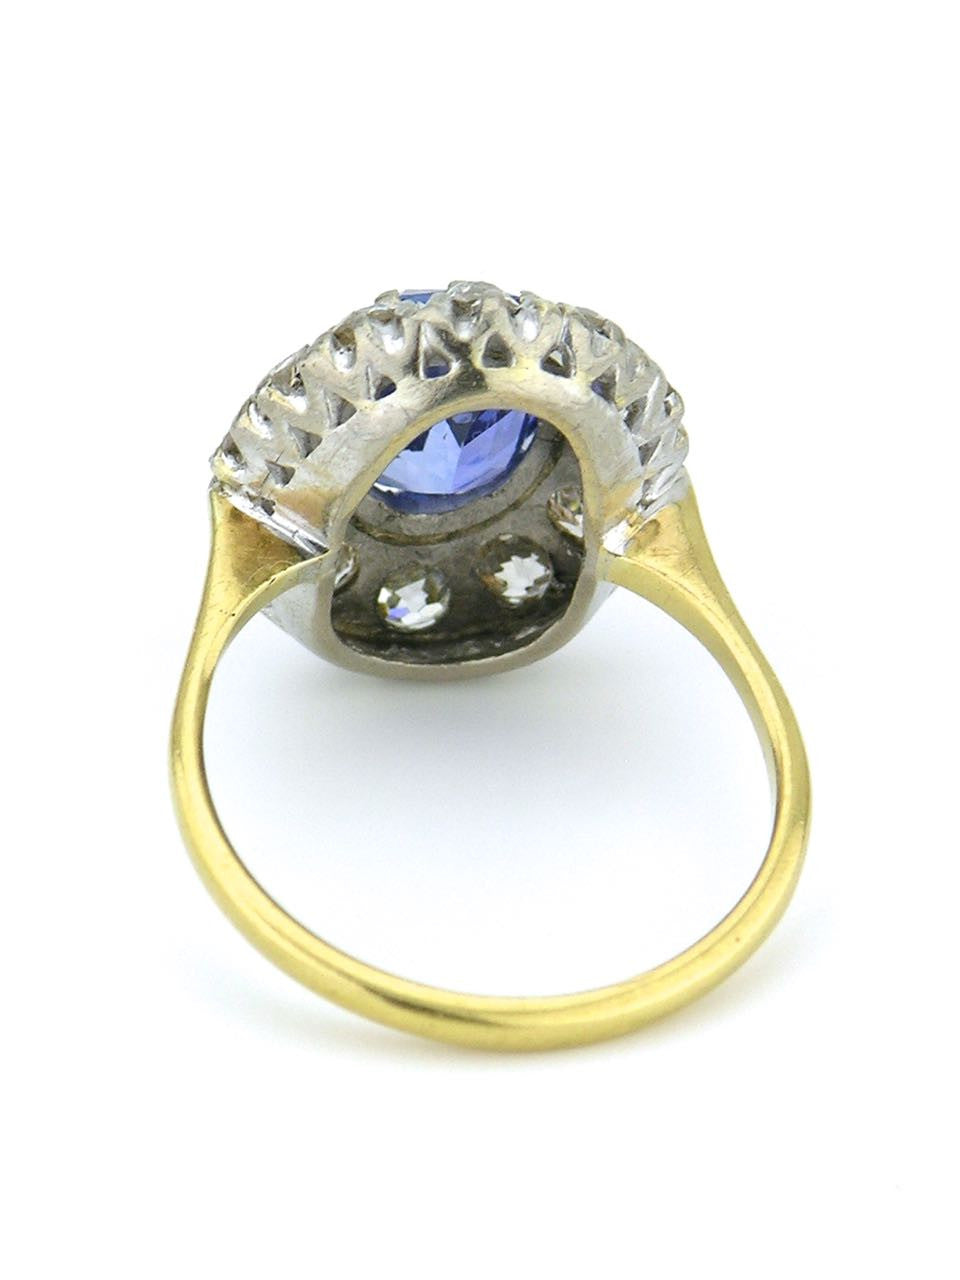 18k white and yellow gold diamond and sapphire ring